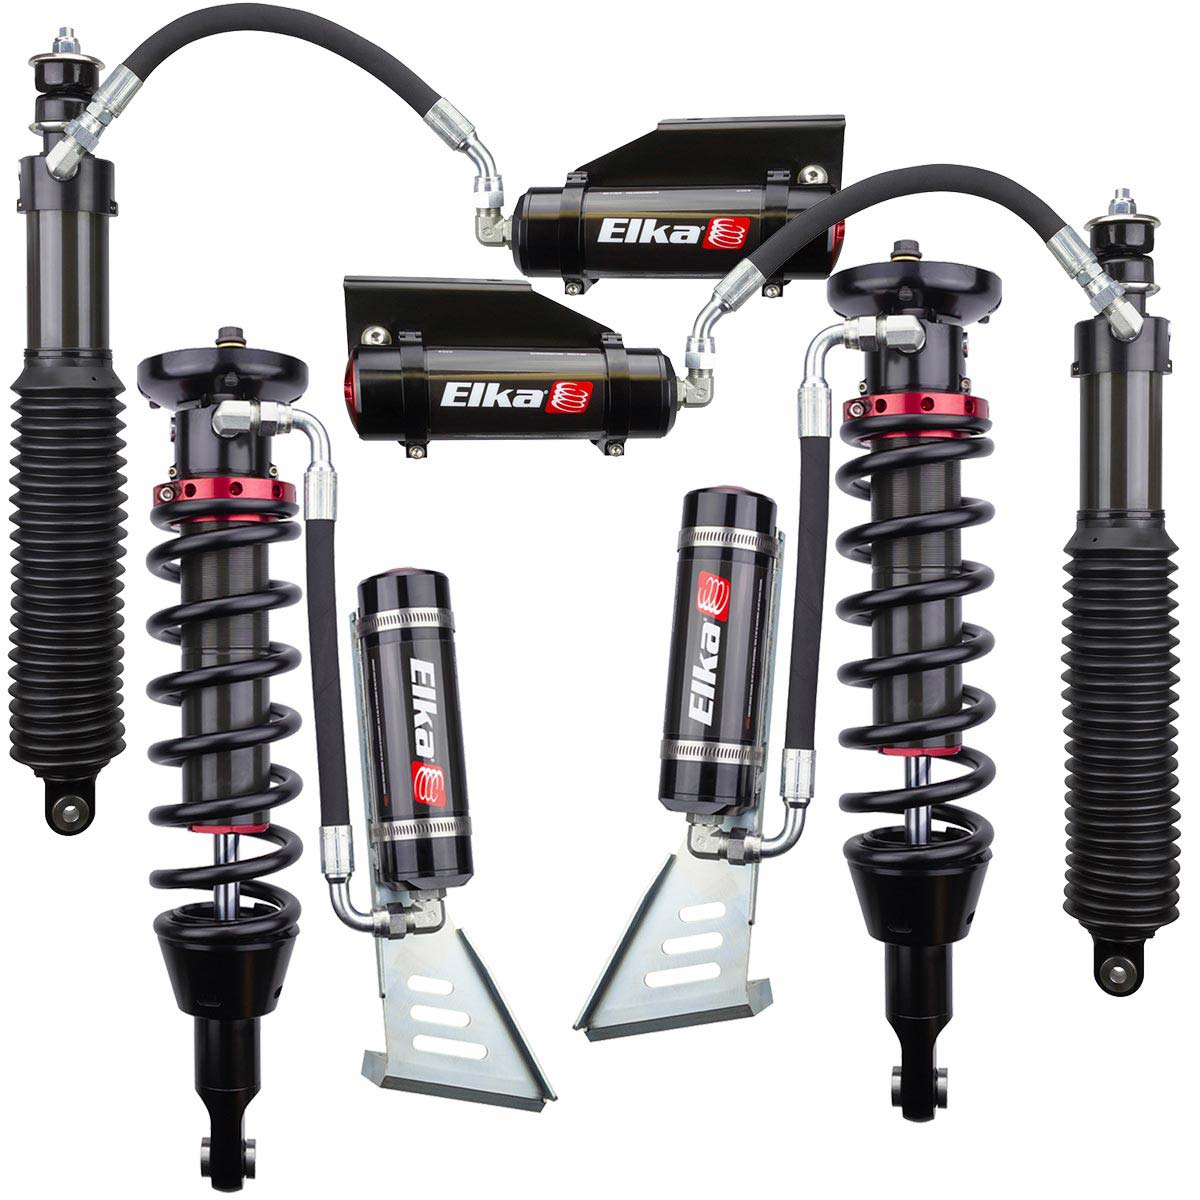 2.5 RESERVOIR FRONT & REAR SHOCKS KIT for TOYOTA 4RUNNER, 1996 to 2002 (0 in. to 3 in. lift) - RA Motorsports Canada